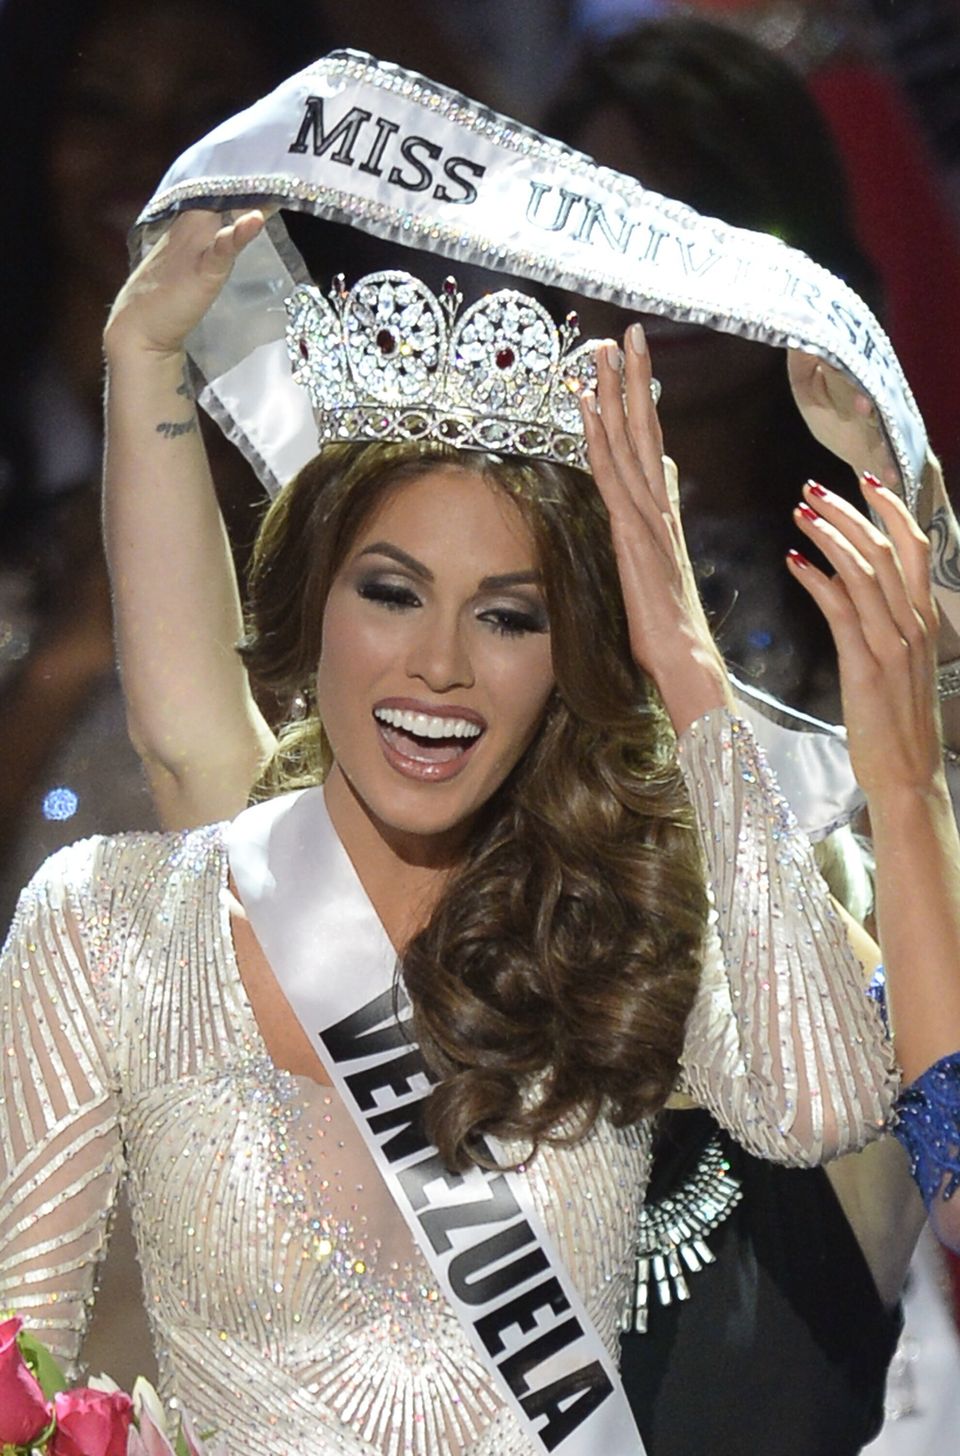 RUSSIA-ENTERTAINMENT-MISS-UNIVERSE